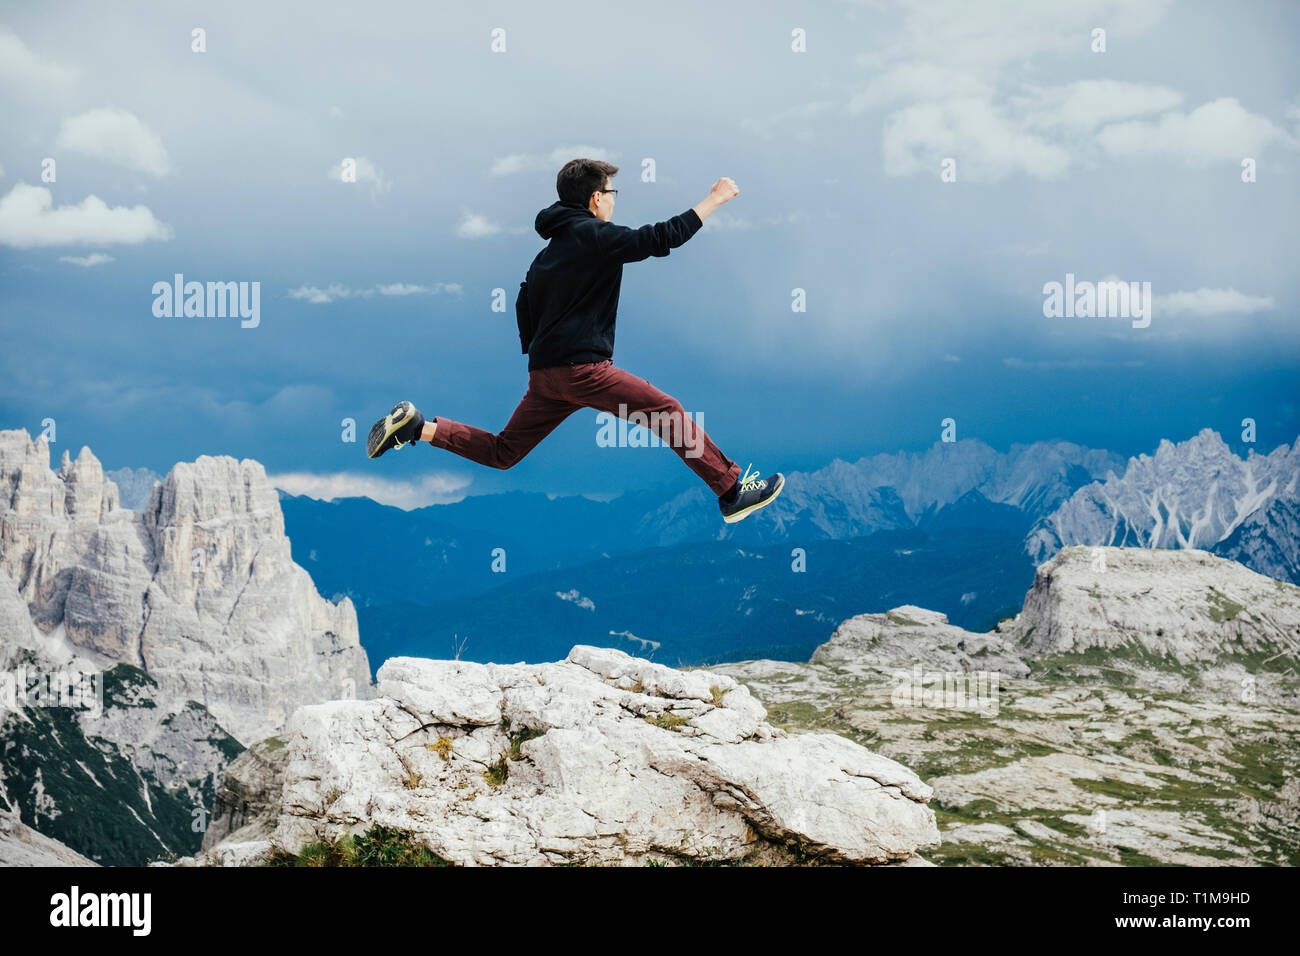 Carefree boy jumping over rocks on mountain, Drei Zinnen Nature Park, South Tyrol, Italy Stock Photo